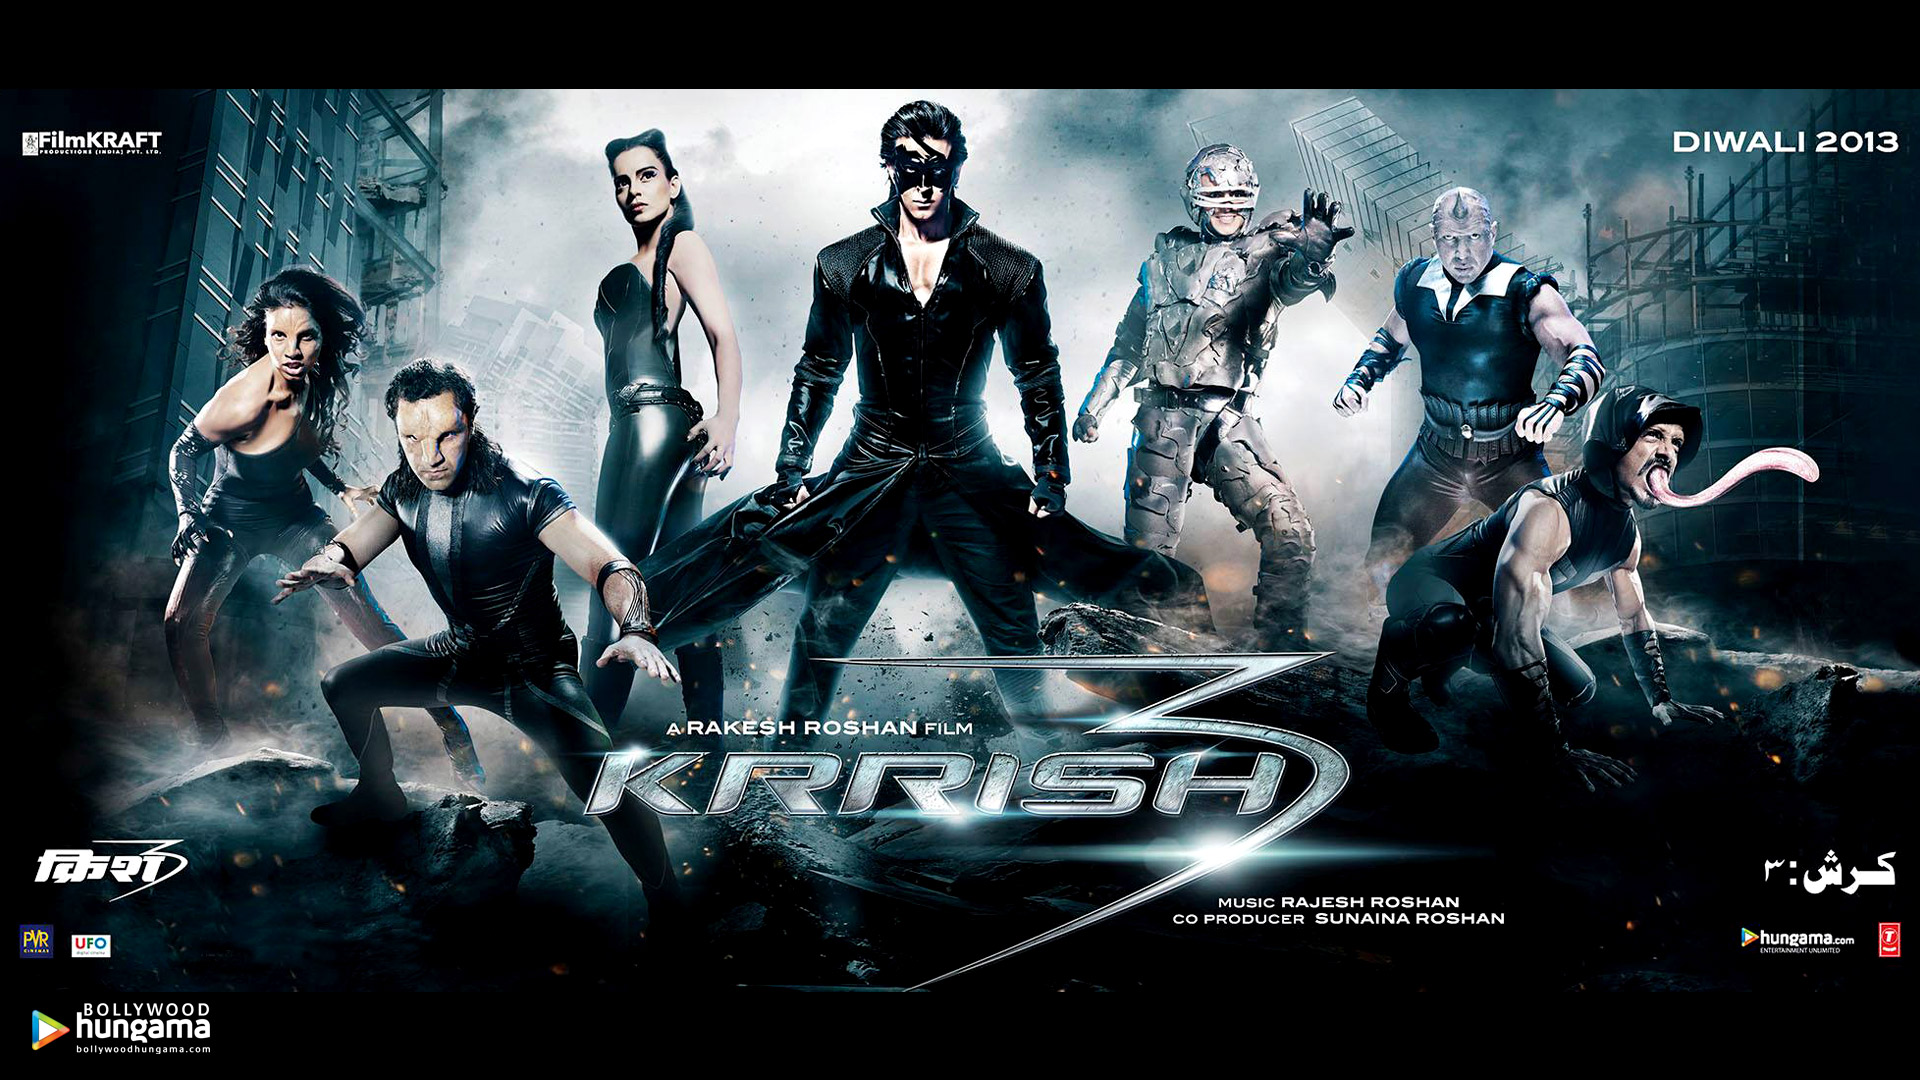 Free download Krrish 3 2013 Wallpapers krrish 3 15 Bollywood Hungama [ 1920x1080] for your Desktop, Mobile & Tablet | Explore 24+ Krrish 3  Wallpapers | Disgaea 3 Wallpaper, Fallout 3 Backgrounds, Fallout 3 Wallpaper